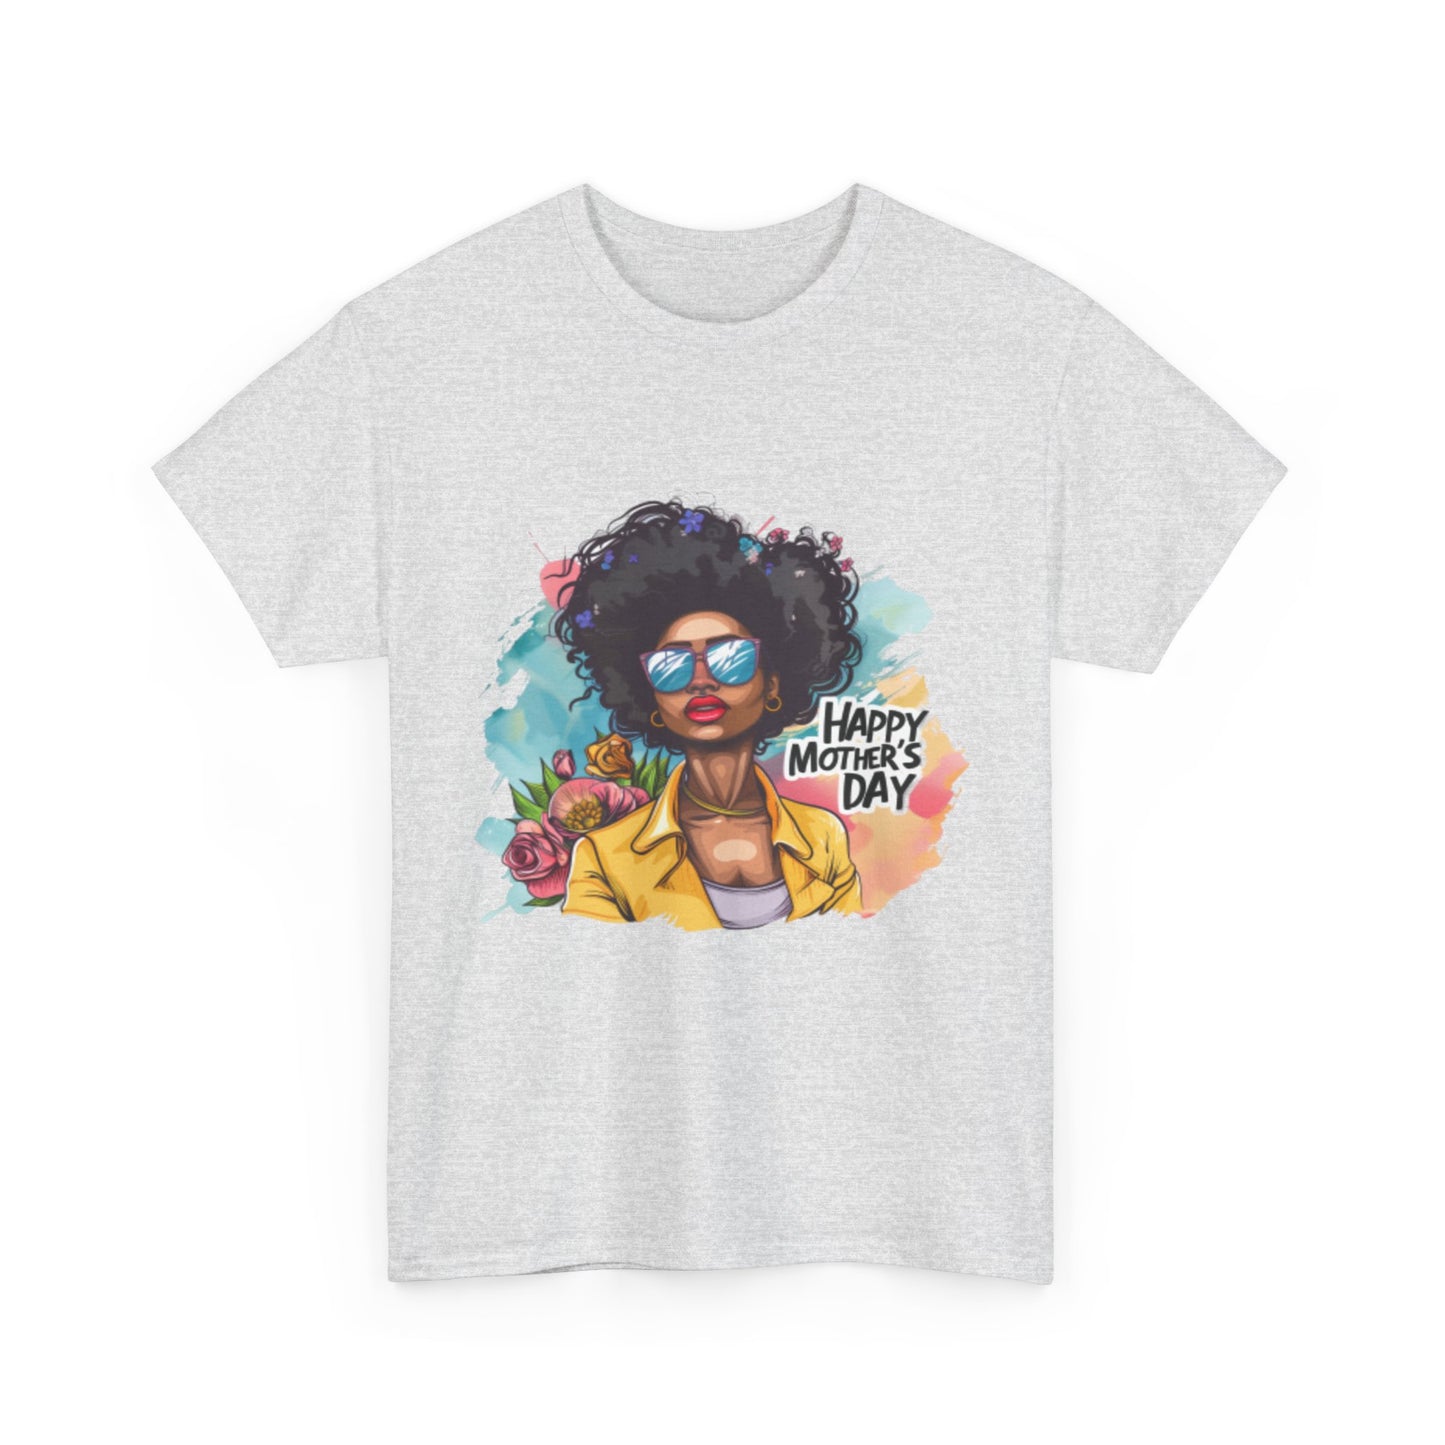 Happy Mother's Day African American Mom Graphic Unisex Heavy Cotton Tee Cotton Funny Humorous Graphic Soft Premium Unisex Men Women Ash T-shirt Birthday Gift-51